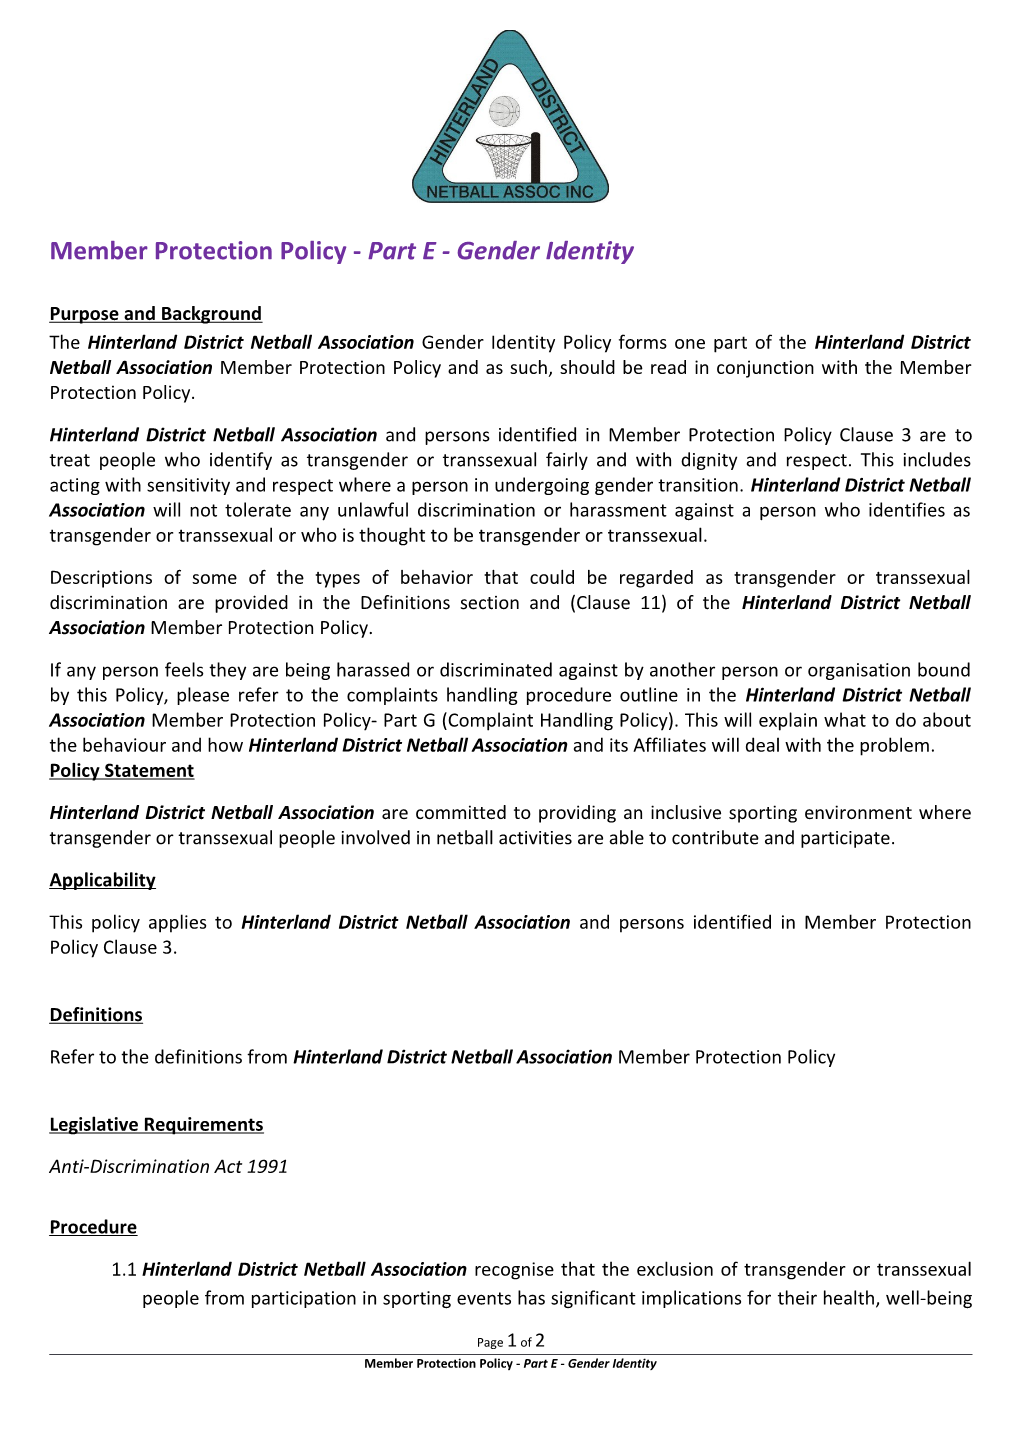 Member Protection Policy -Part E - Gender Identity